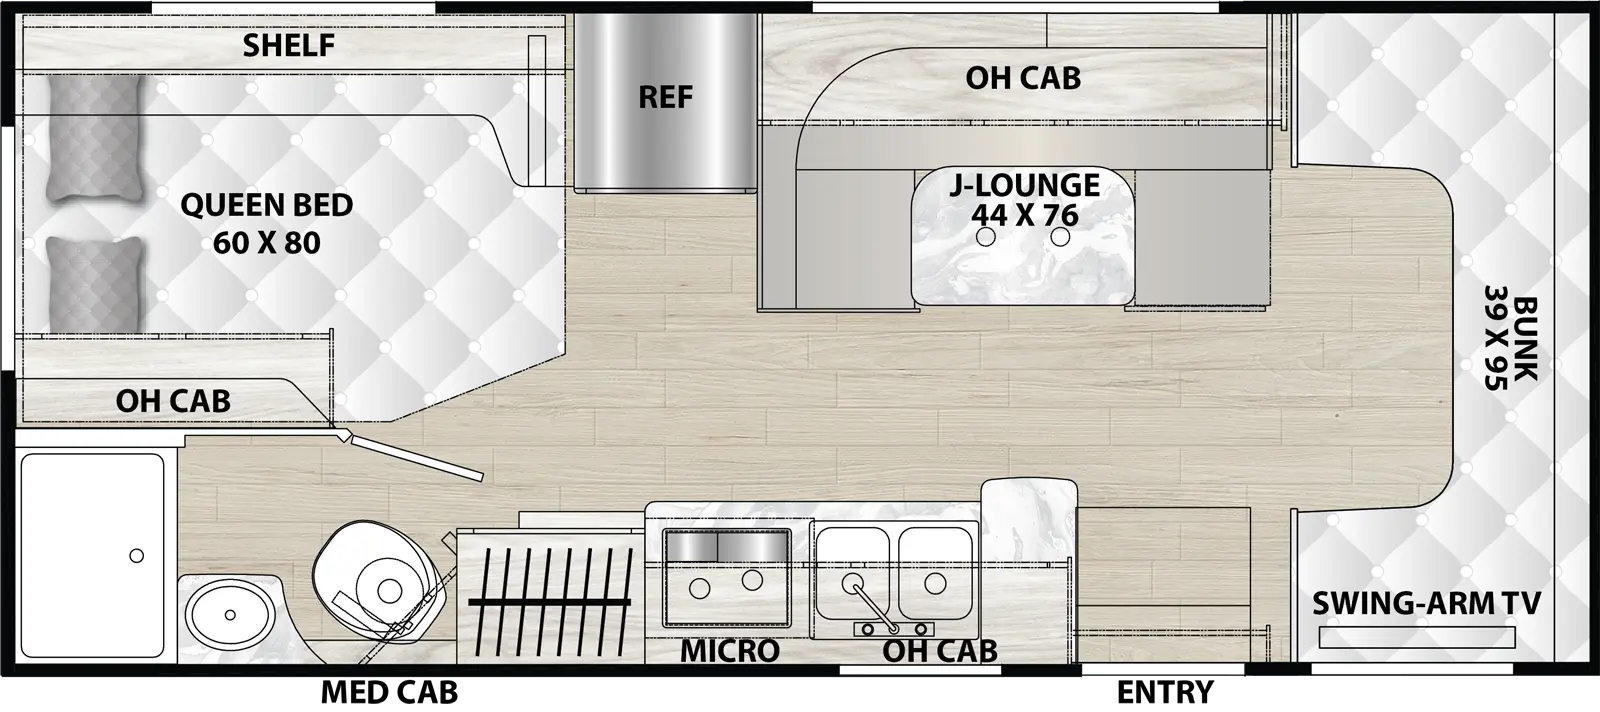 The Cross Trail 22XG has 0 slideouts and 1 entry door.  Interior layout from front to back; front 39 inch by 95 inch bunk with a swing arm TV; door side kitchen with microwave above stovetop, double basin sink and overhead cabinet; off-door side 44 inch by 76 inch J-Lounge with overhead cabinets; off-door side refrigerator;  off-door rear bedroom with 60 inch by 80 inch foot facing queen bed with overhead cabinets and shelf; rear door side bathroom with shower, sink, toilet with medicine cabinet.